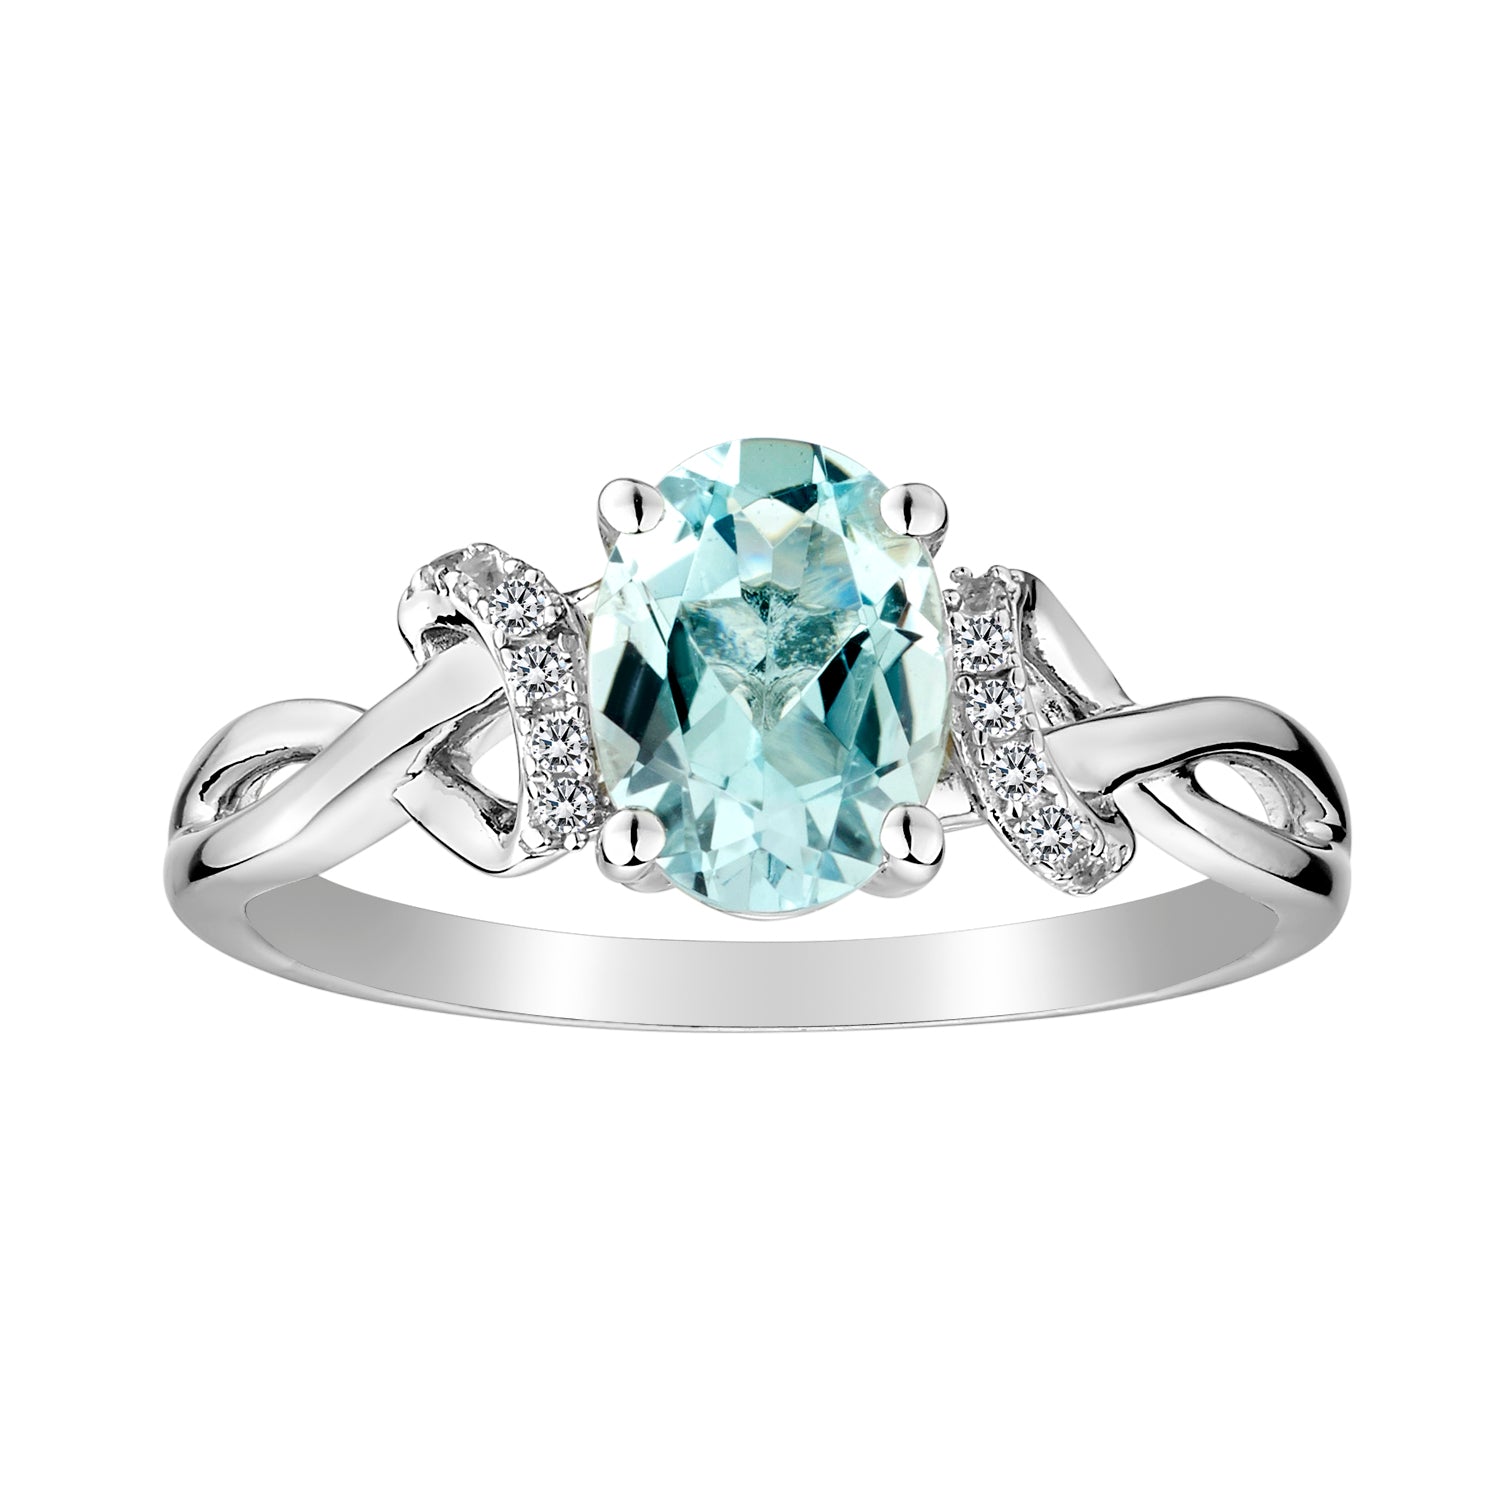 Genuine 8x6 mm Aquamarine and White Sapphire Ring,  Sterling Silver. Gemstone Rings. Griffin Jewellery Designs